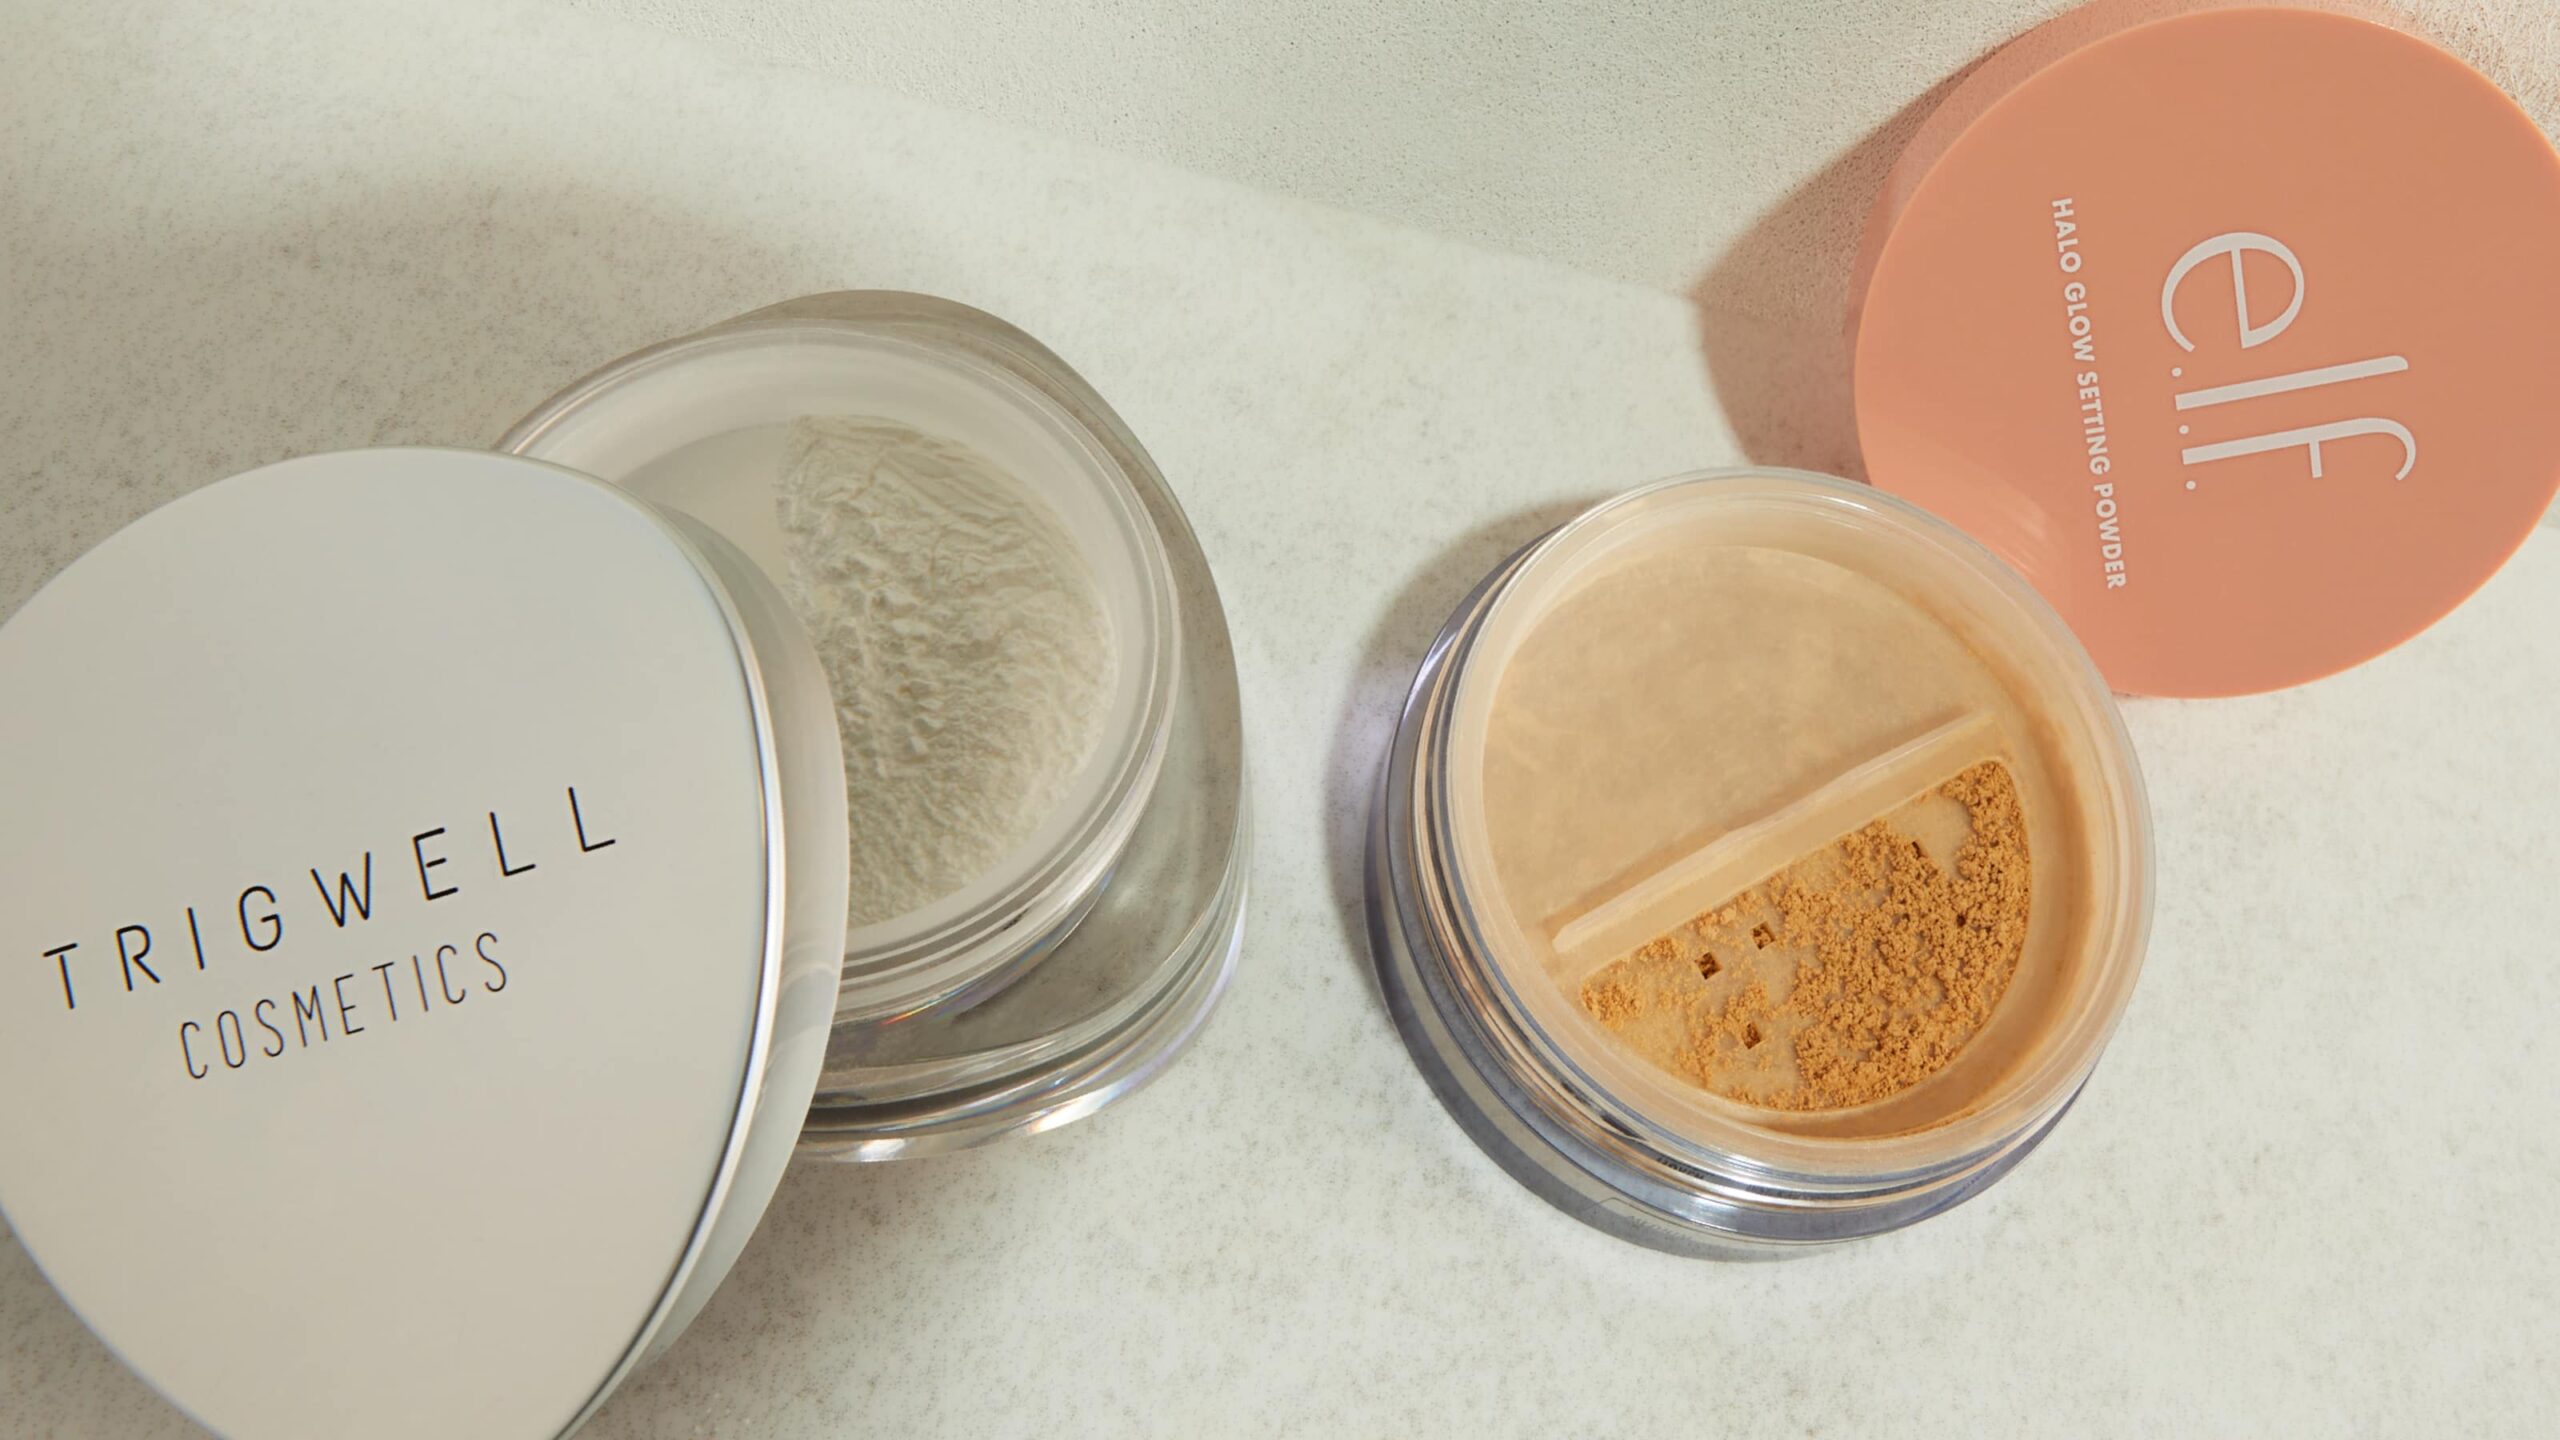  e.l.f. Halo Glow Soft Focus Setting Powder, Silky Powder For  Creating Without Shine, Smooths Pores & Lines, Light Pink : Beauty &  Personal Care